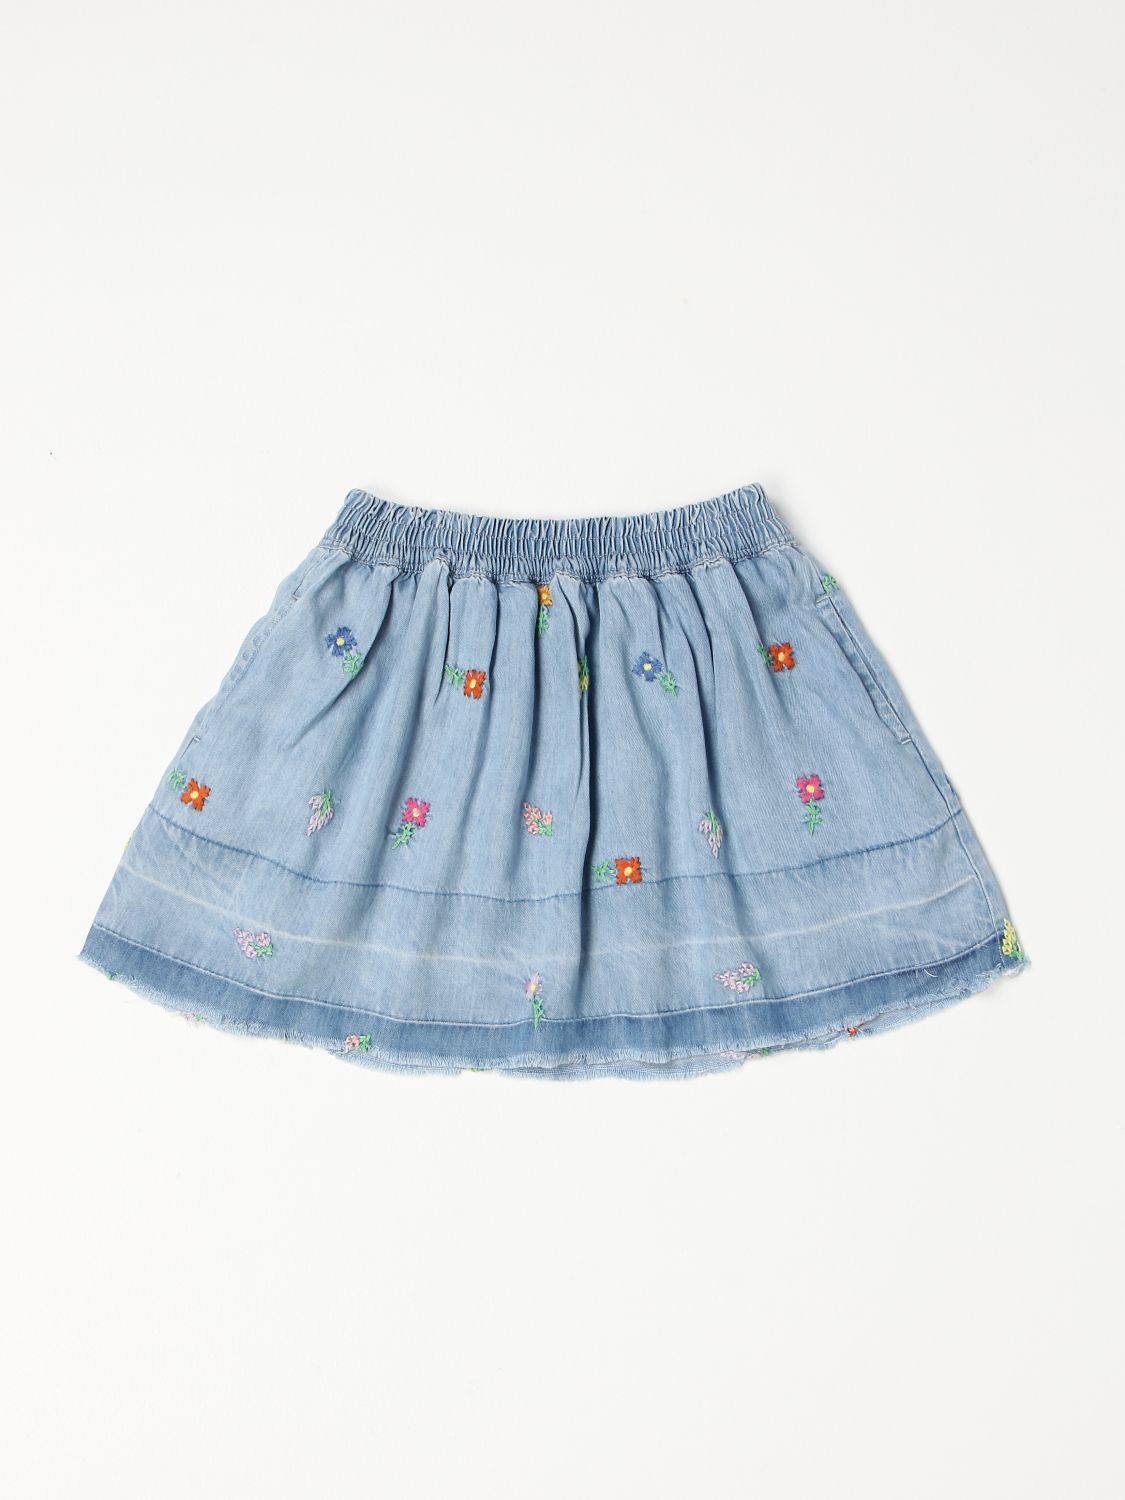 Skirt Stella Mccartney: Stella McCartney skirt with floral embroidery multicolor 1